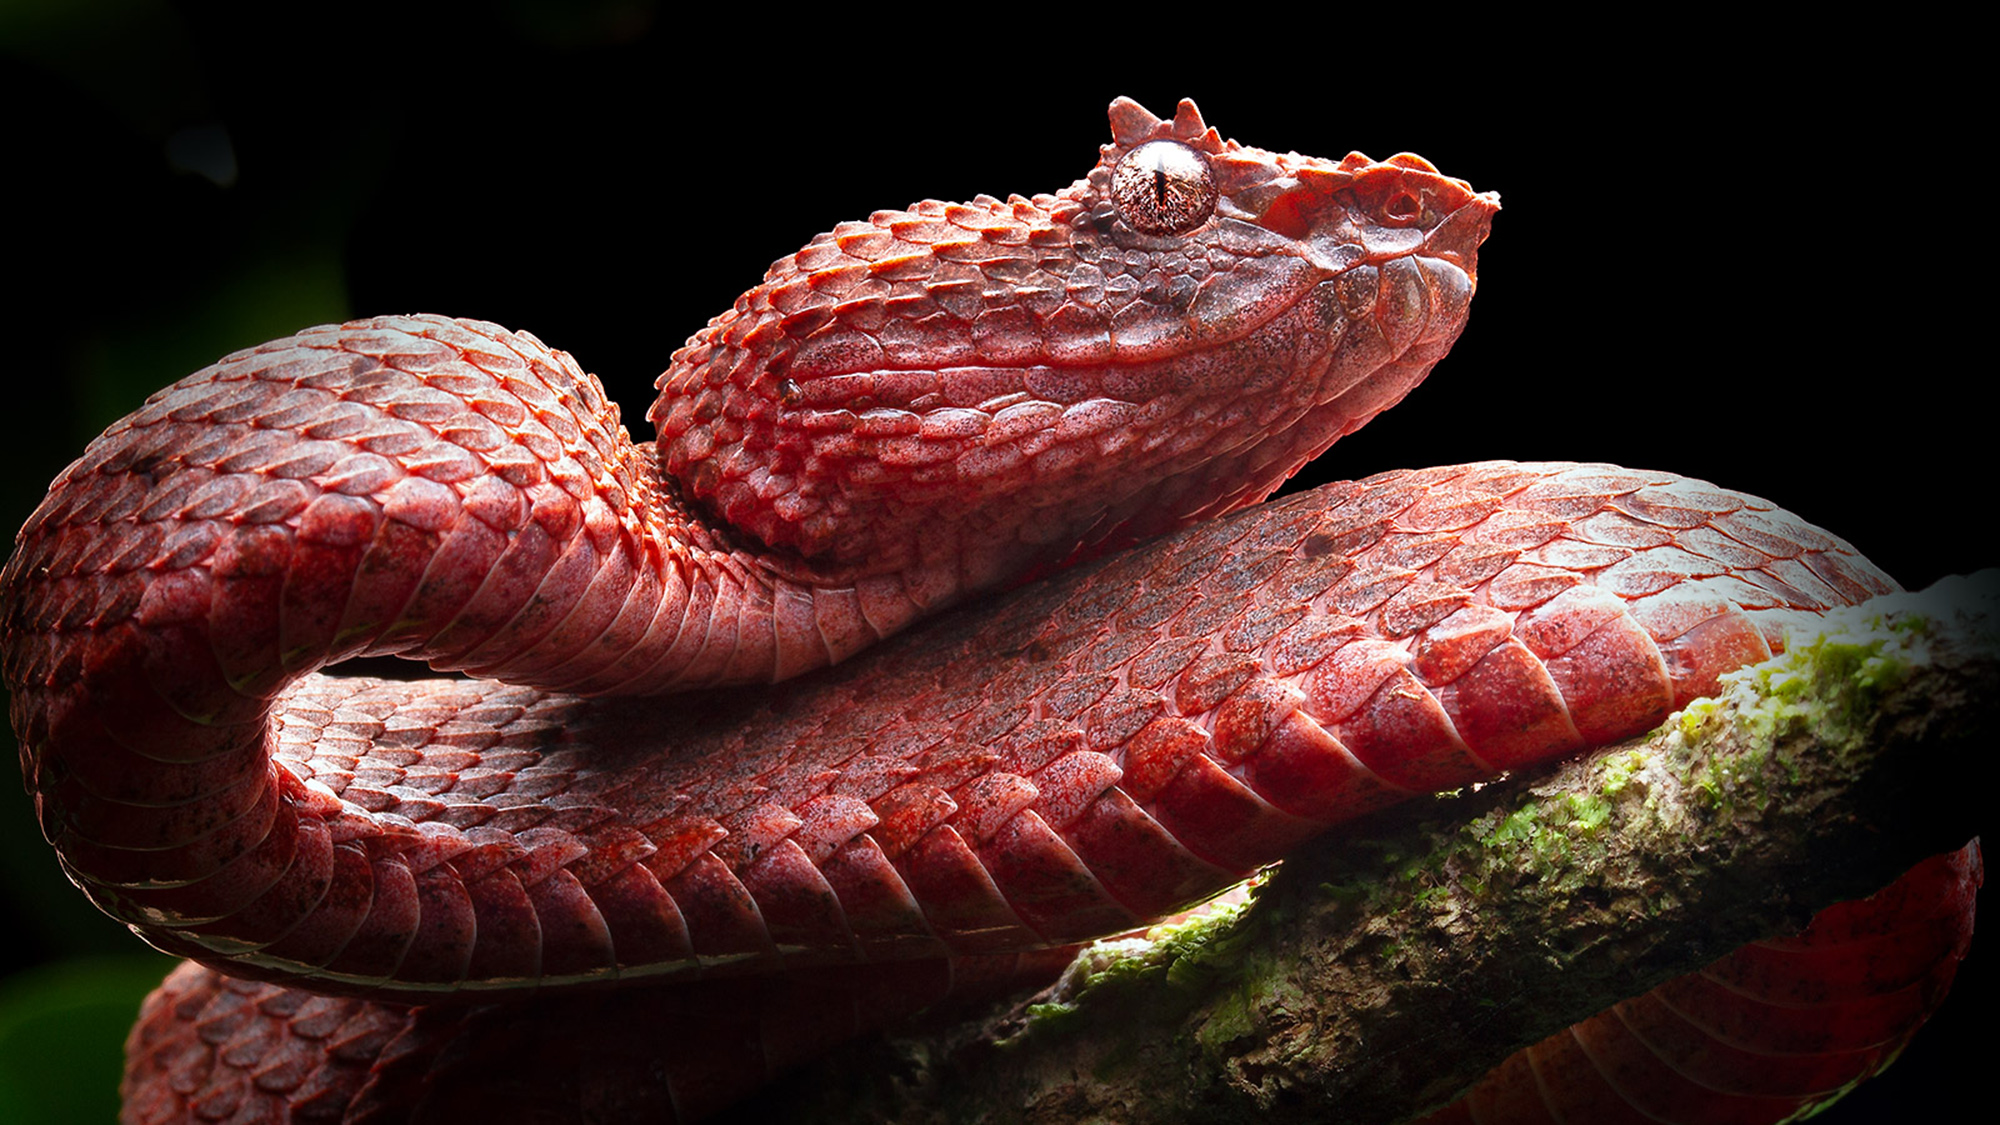 An eyelash pitviper from the New Wold tropics.